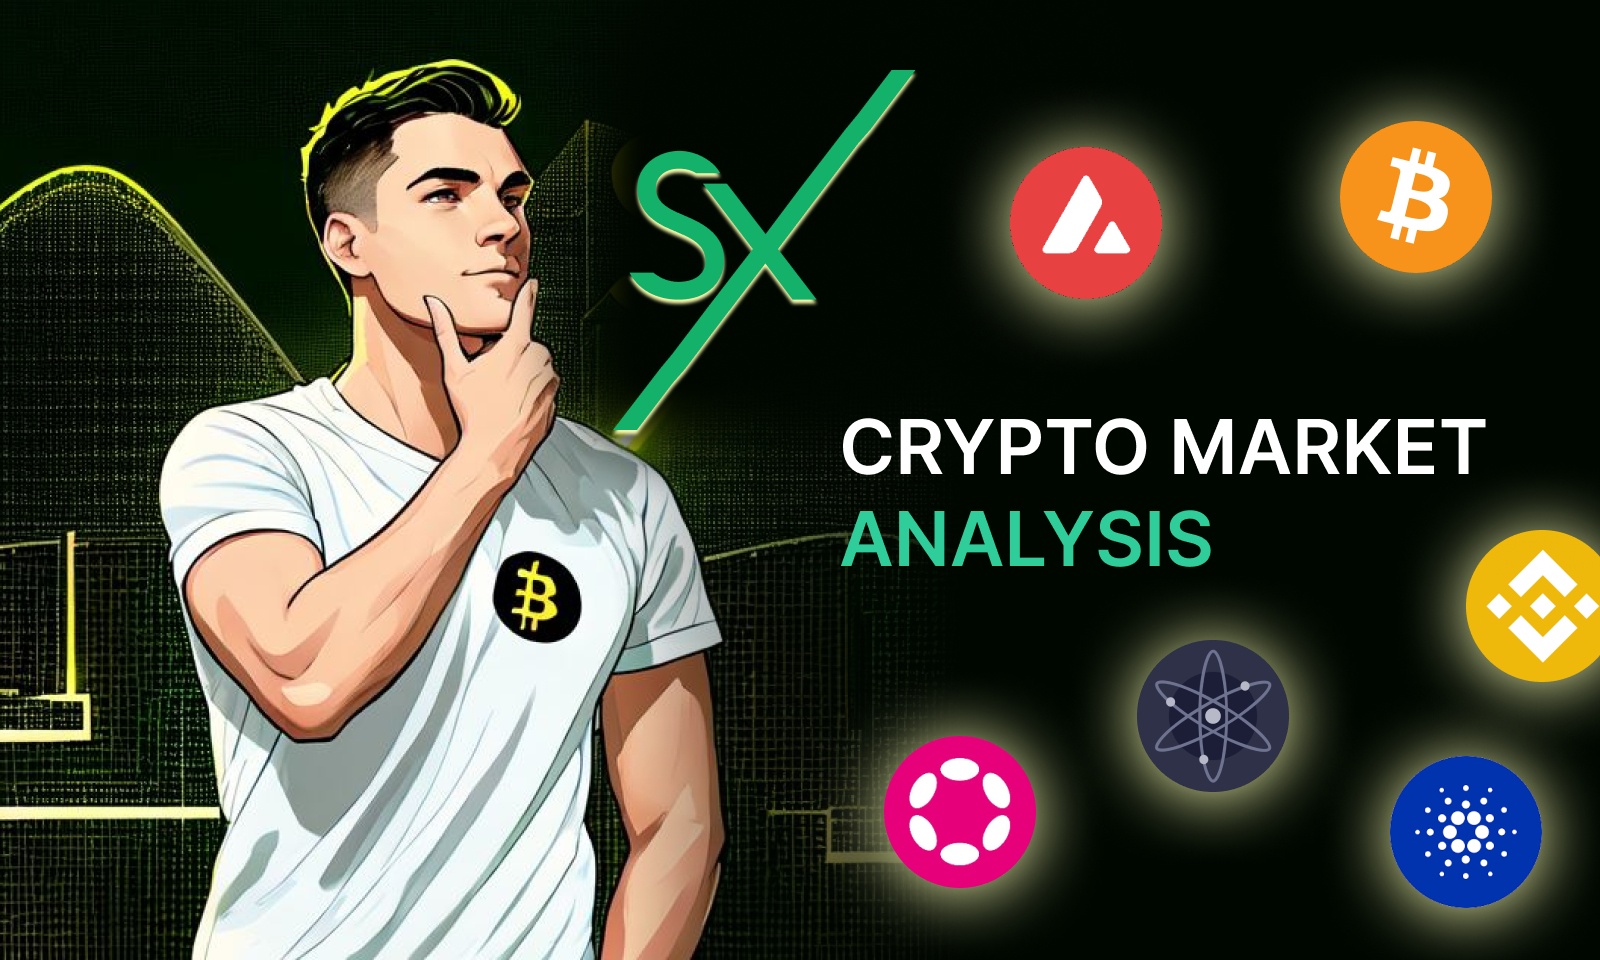 How to make money consistently in crypto?